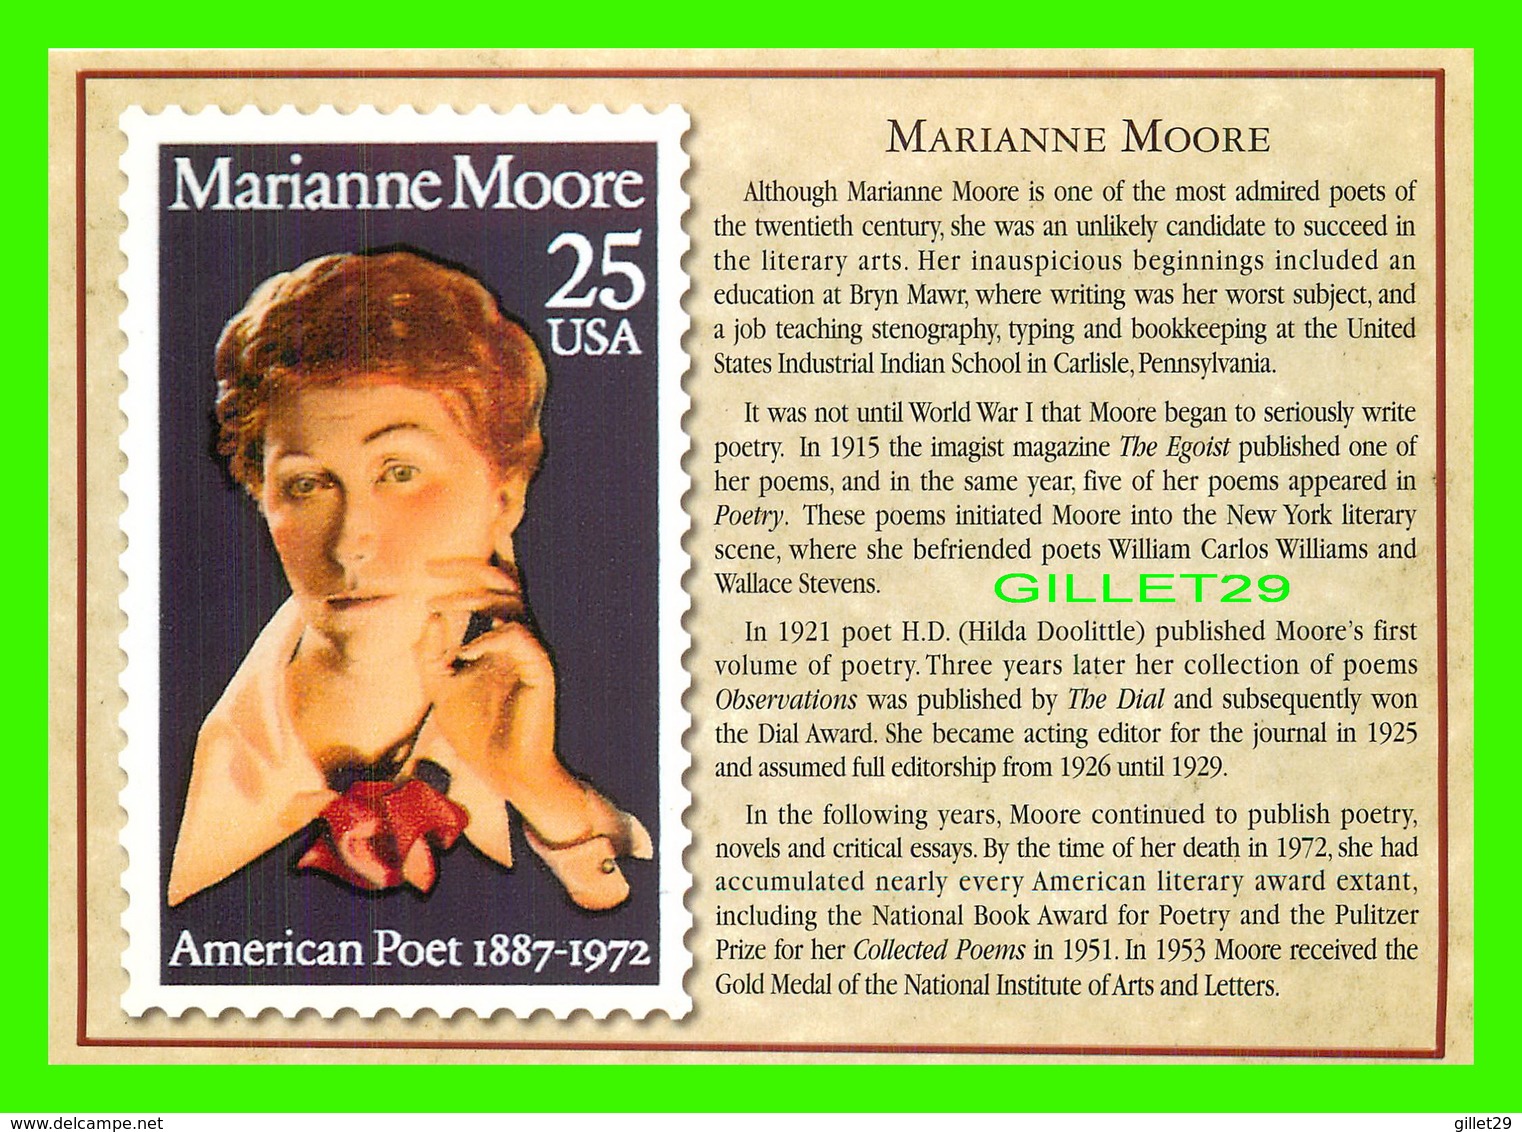 TIMBRES REPRÉSENTATIOINS - GREAT AMERICAN WRITERS, MARIANNE MOORE, POET (1887-1972) - STAMP ISSUE DATE, 1990 - - Timbres (représentations)